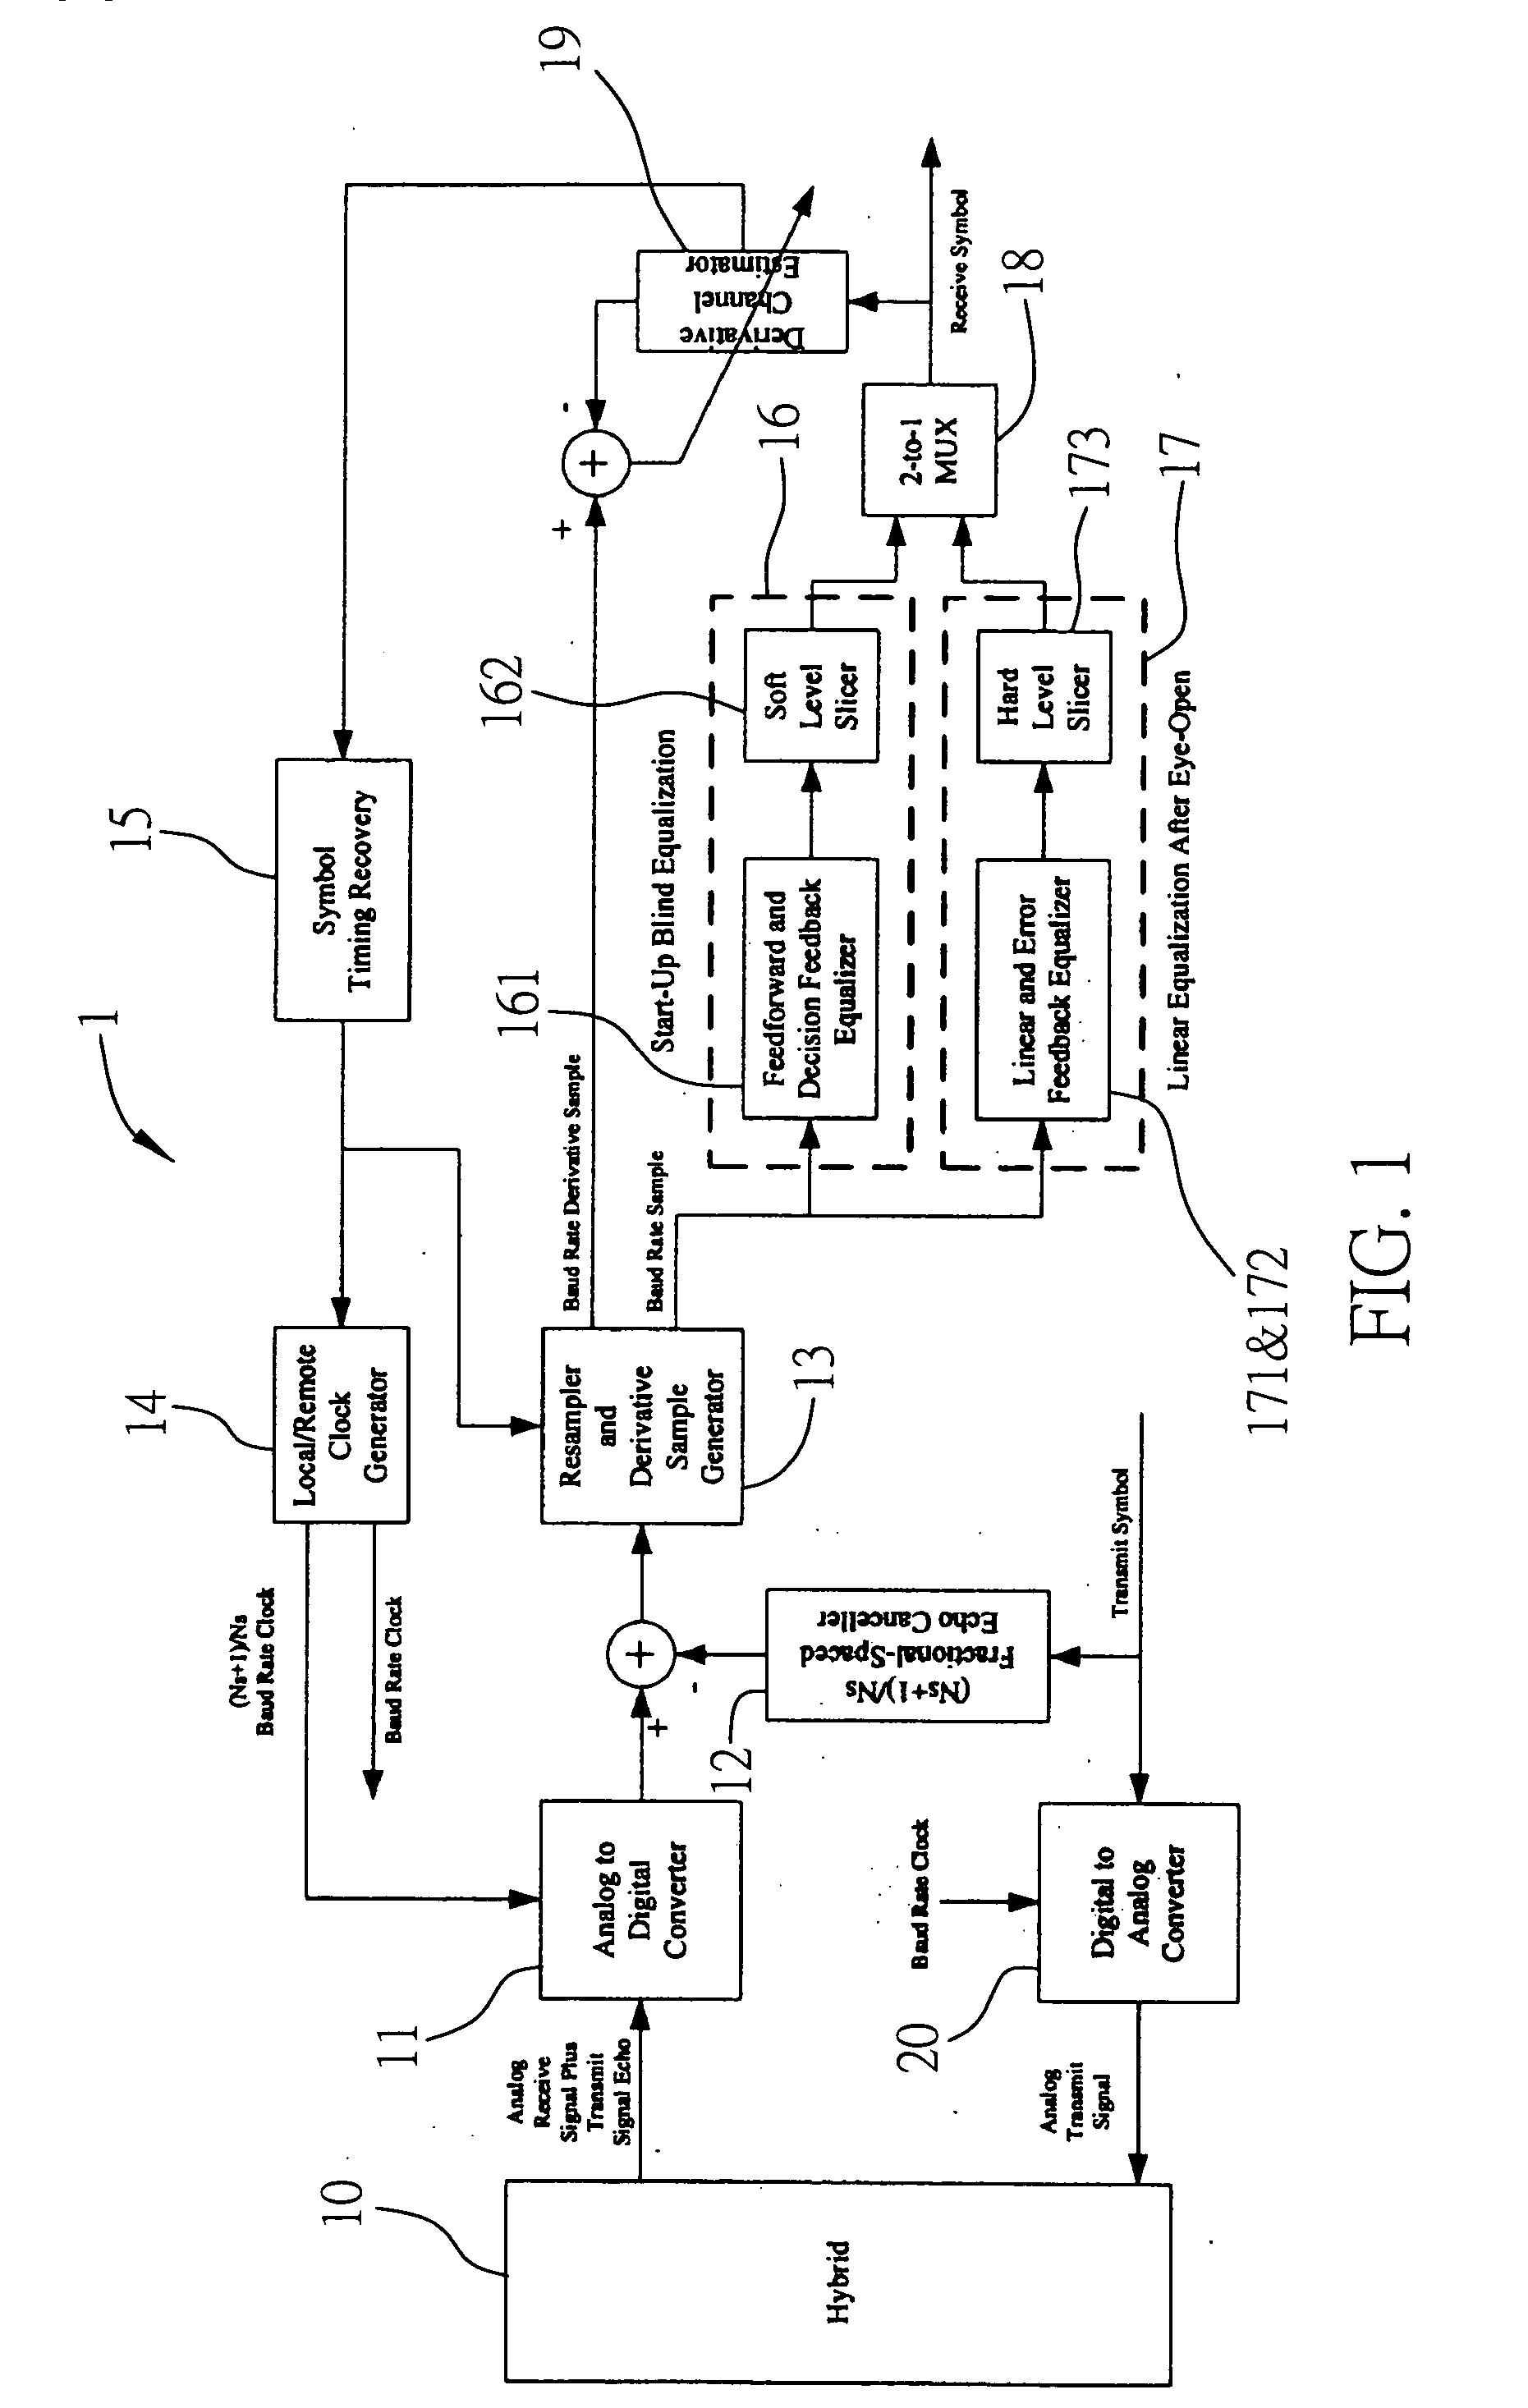 Adaptive blind start-up receiver architecture with fractional baud rate sampling for full-duplex multi-level PAM systems